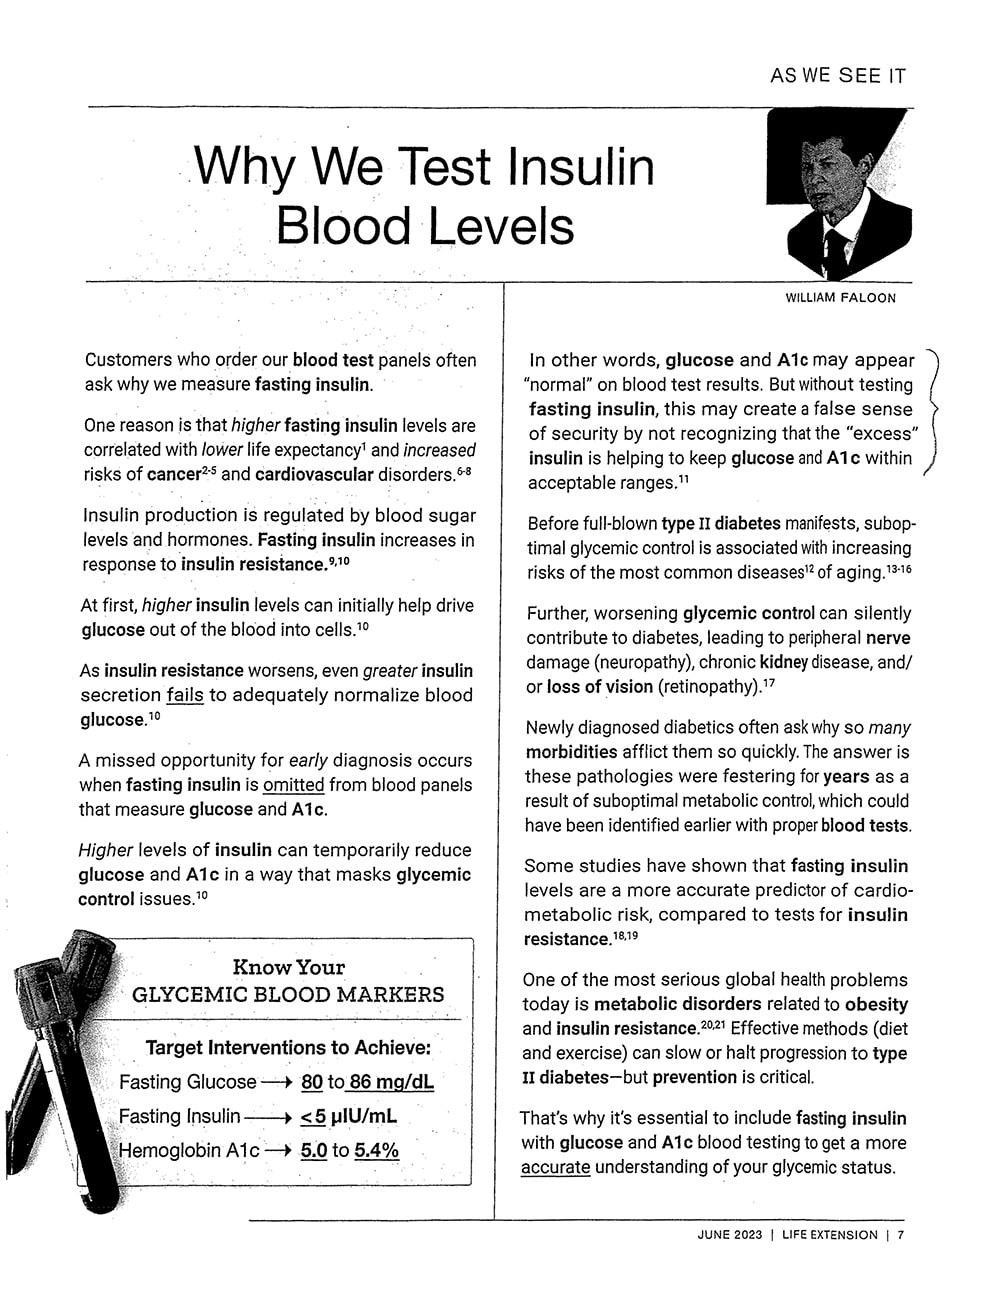 Why We Test Insulin Blood Levels